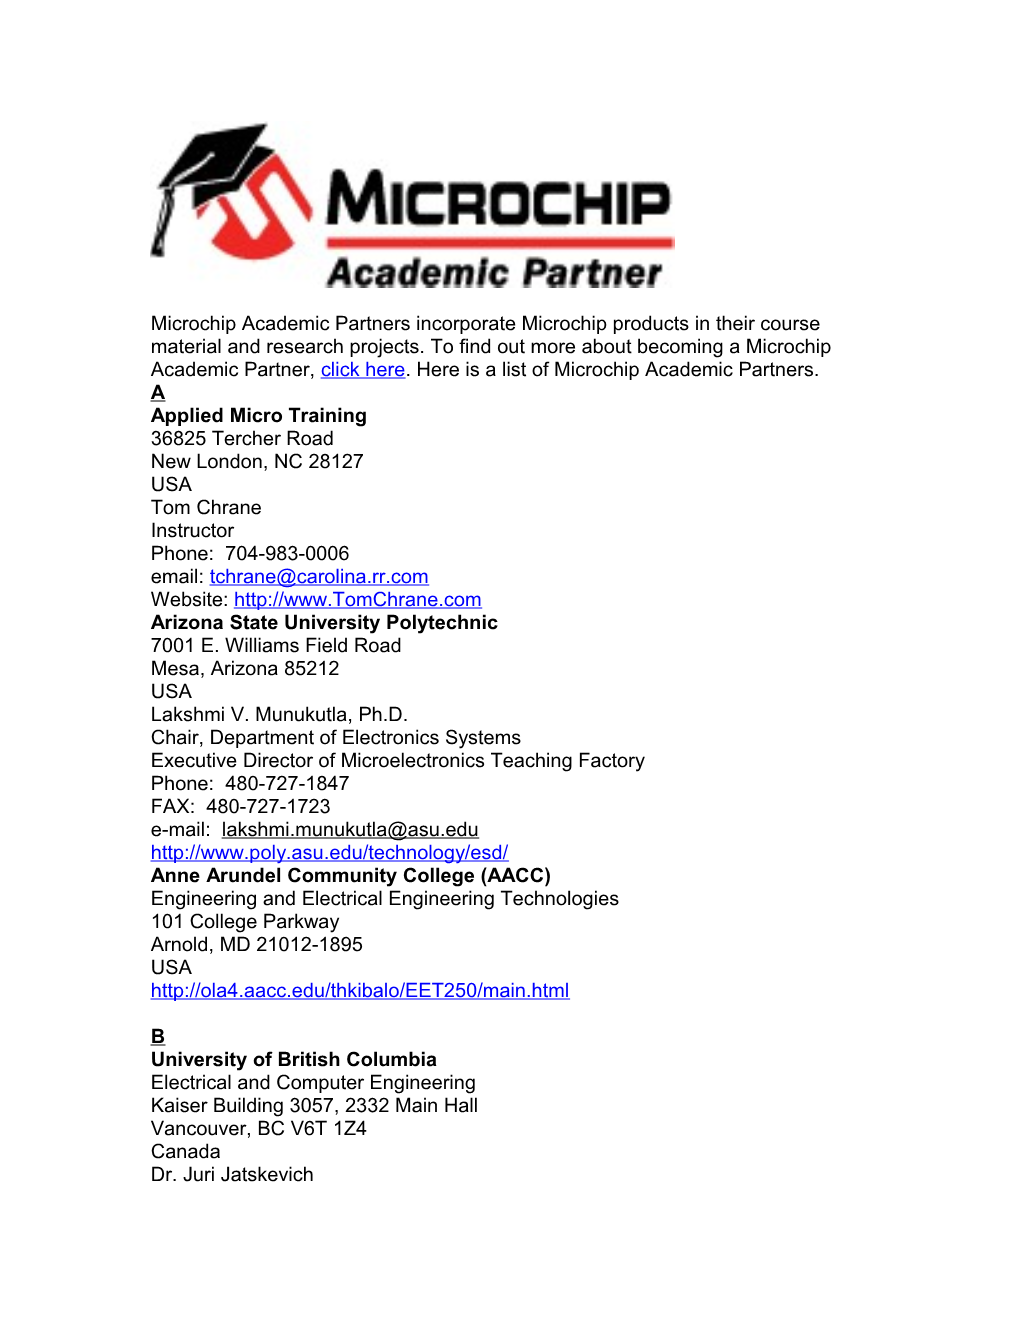 Microchip Academic Partners Incorporate Microchip Products in Their Course Material And